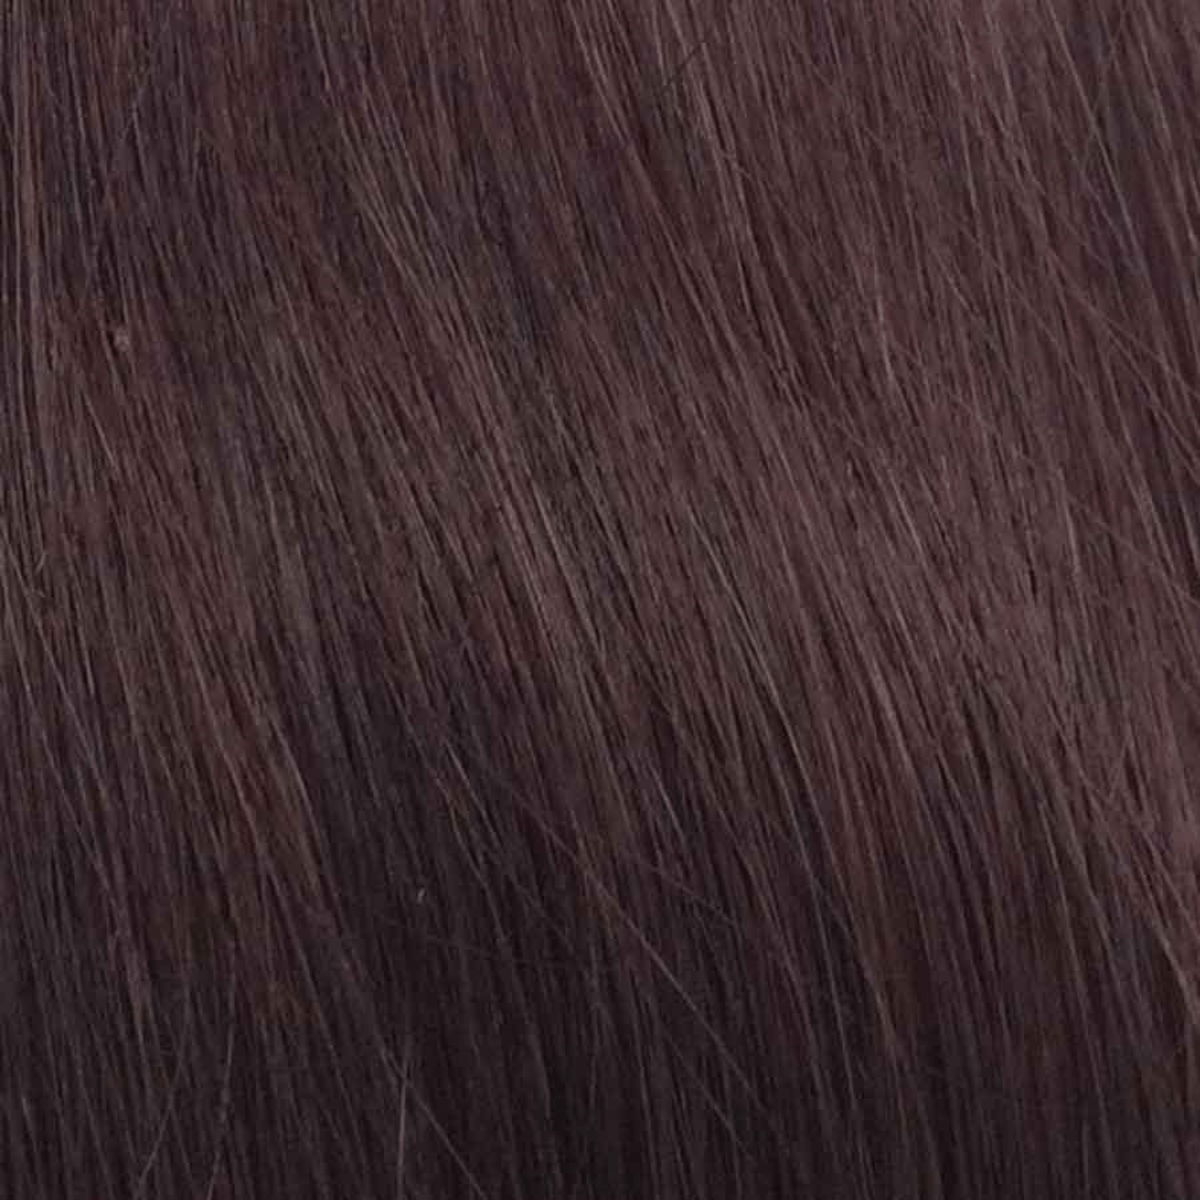 Aria Beauty Hair Styling Accessories Mauve 18" Human Hair Extensions